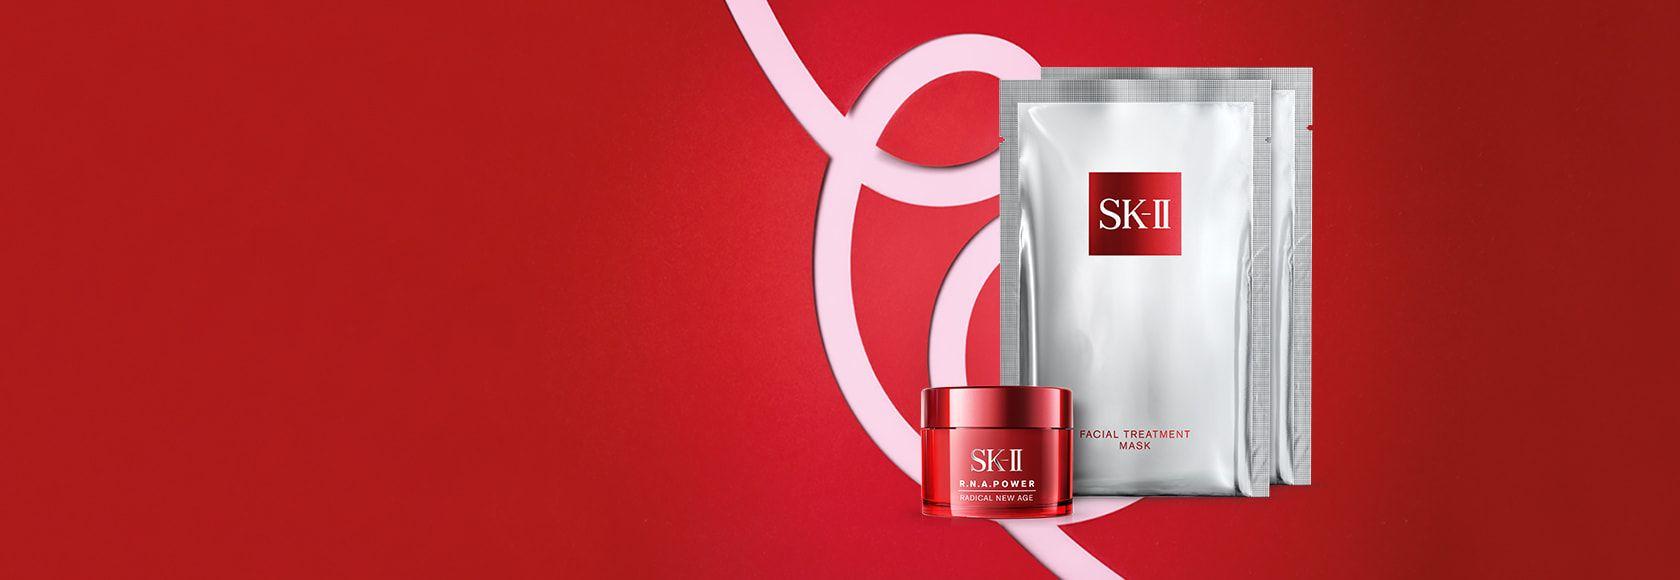 American Personal Care Company Logo - SK-II Official Site | High End Skin Care & Beauty Products